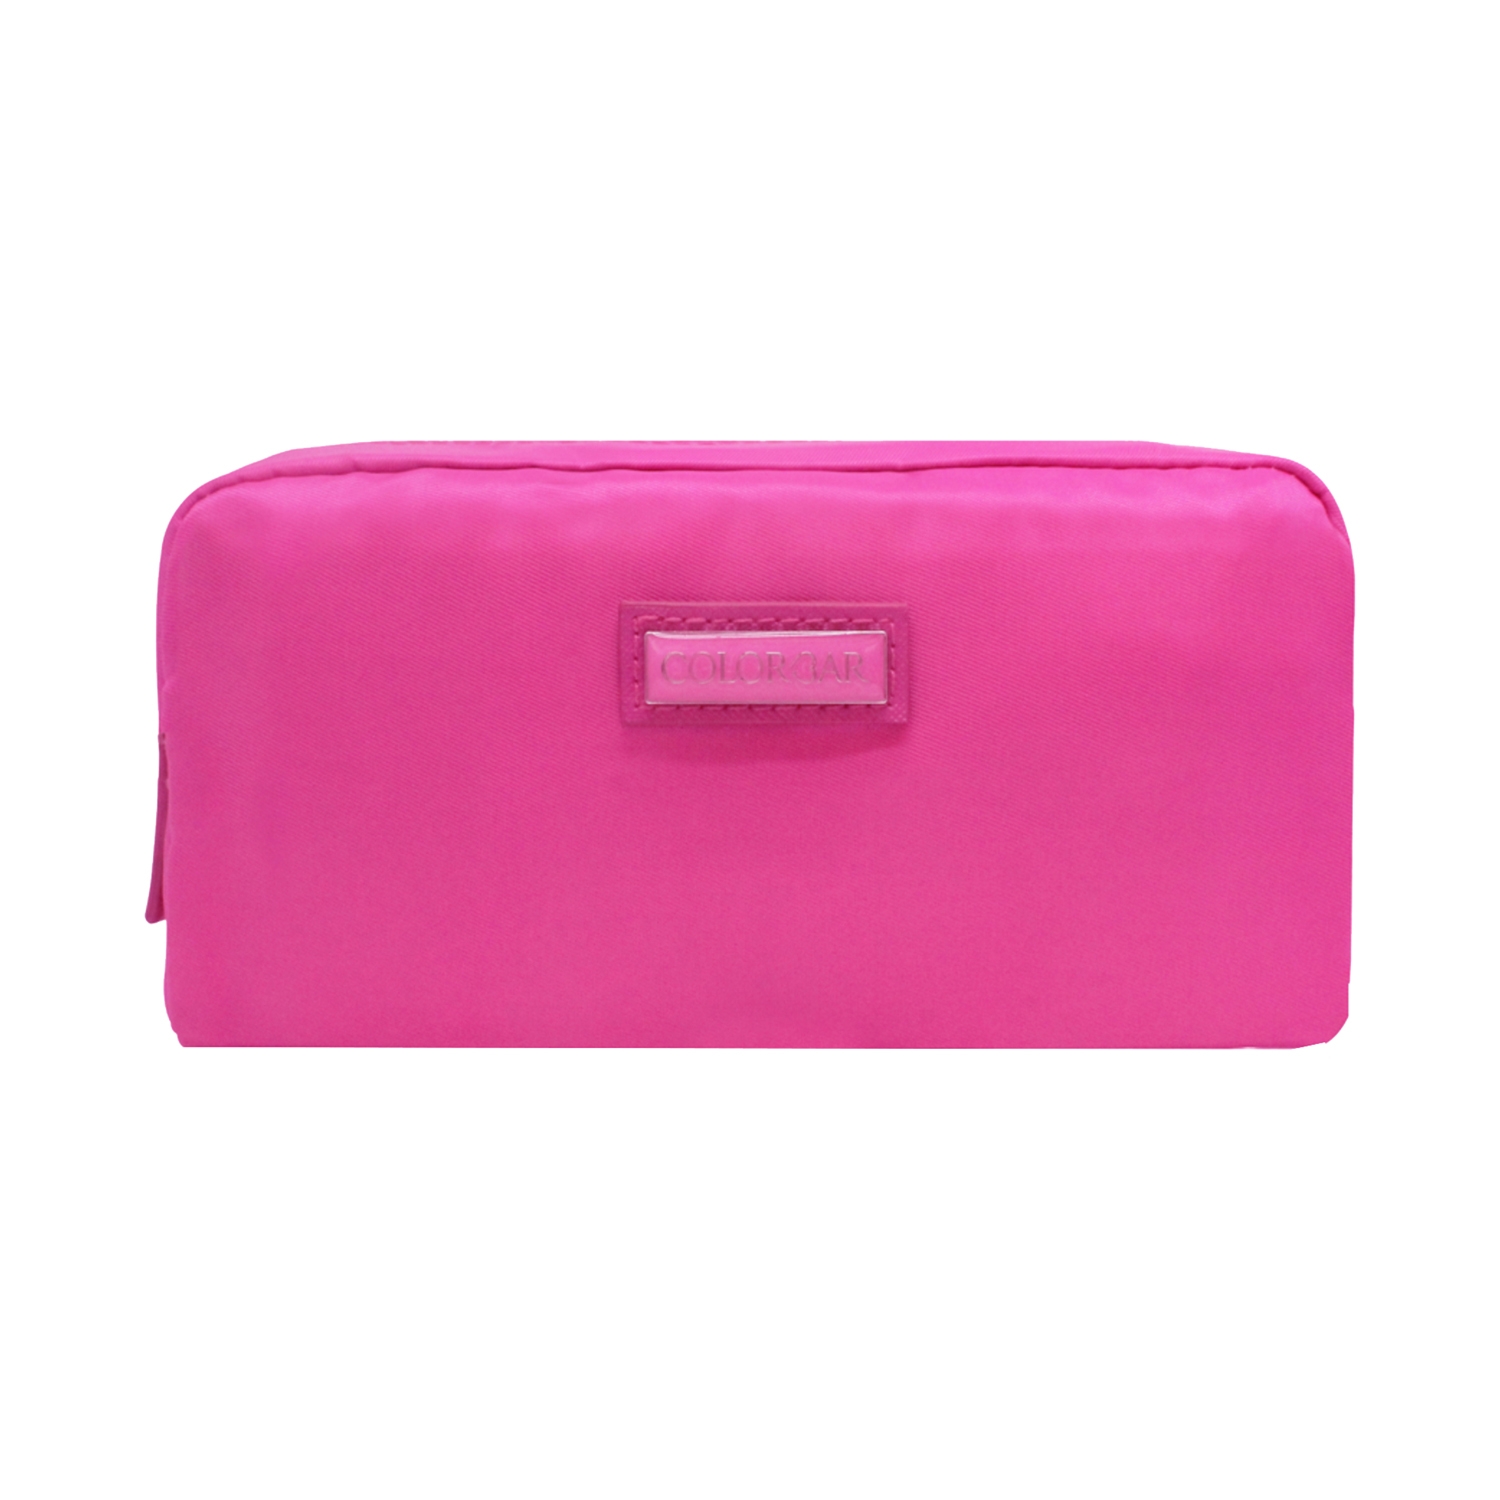 Colorbar | Colorbar Maxi Pouch New - Pink